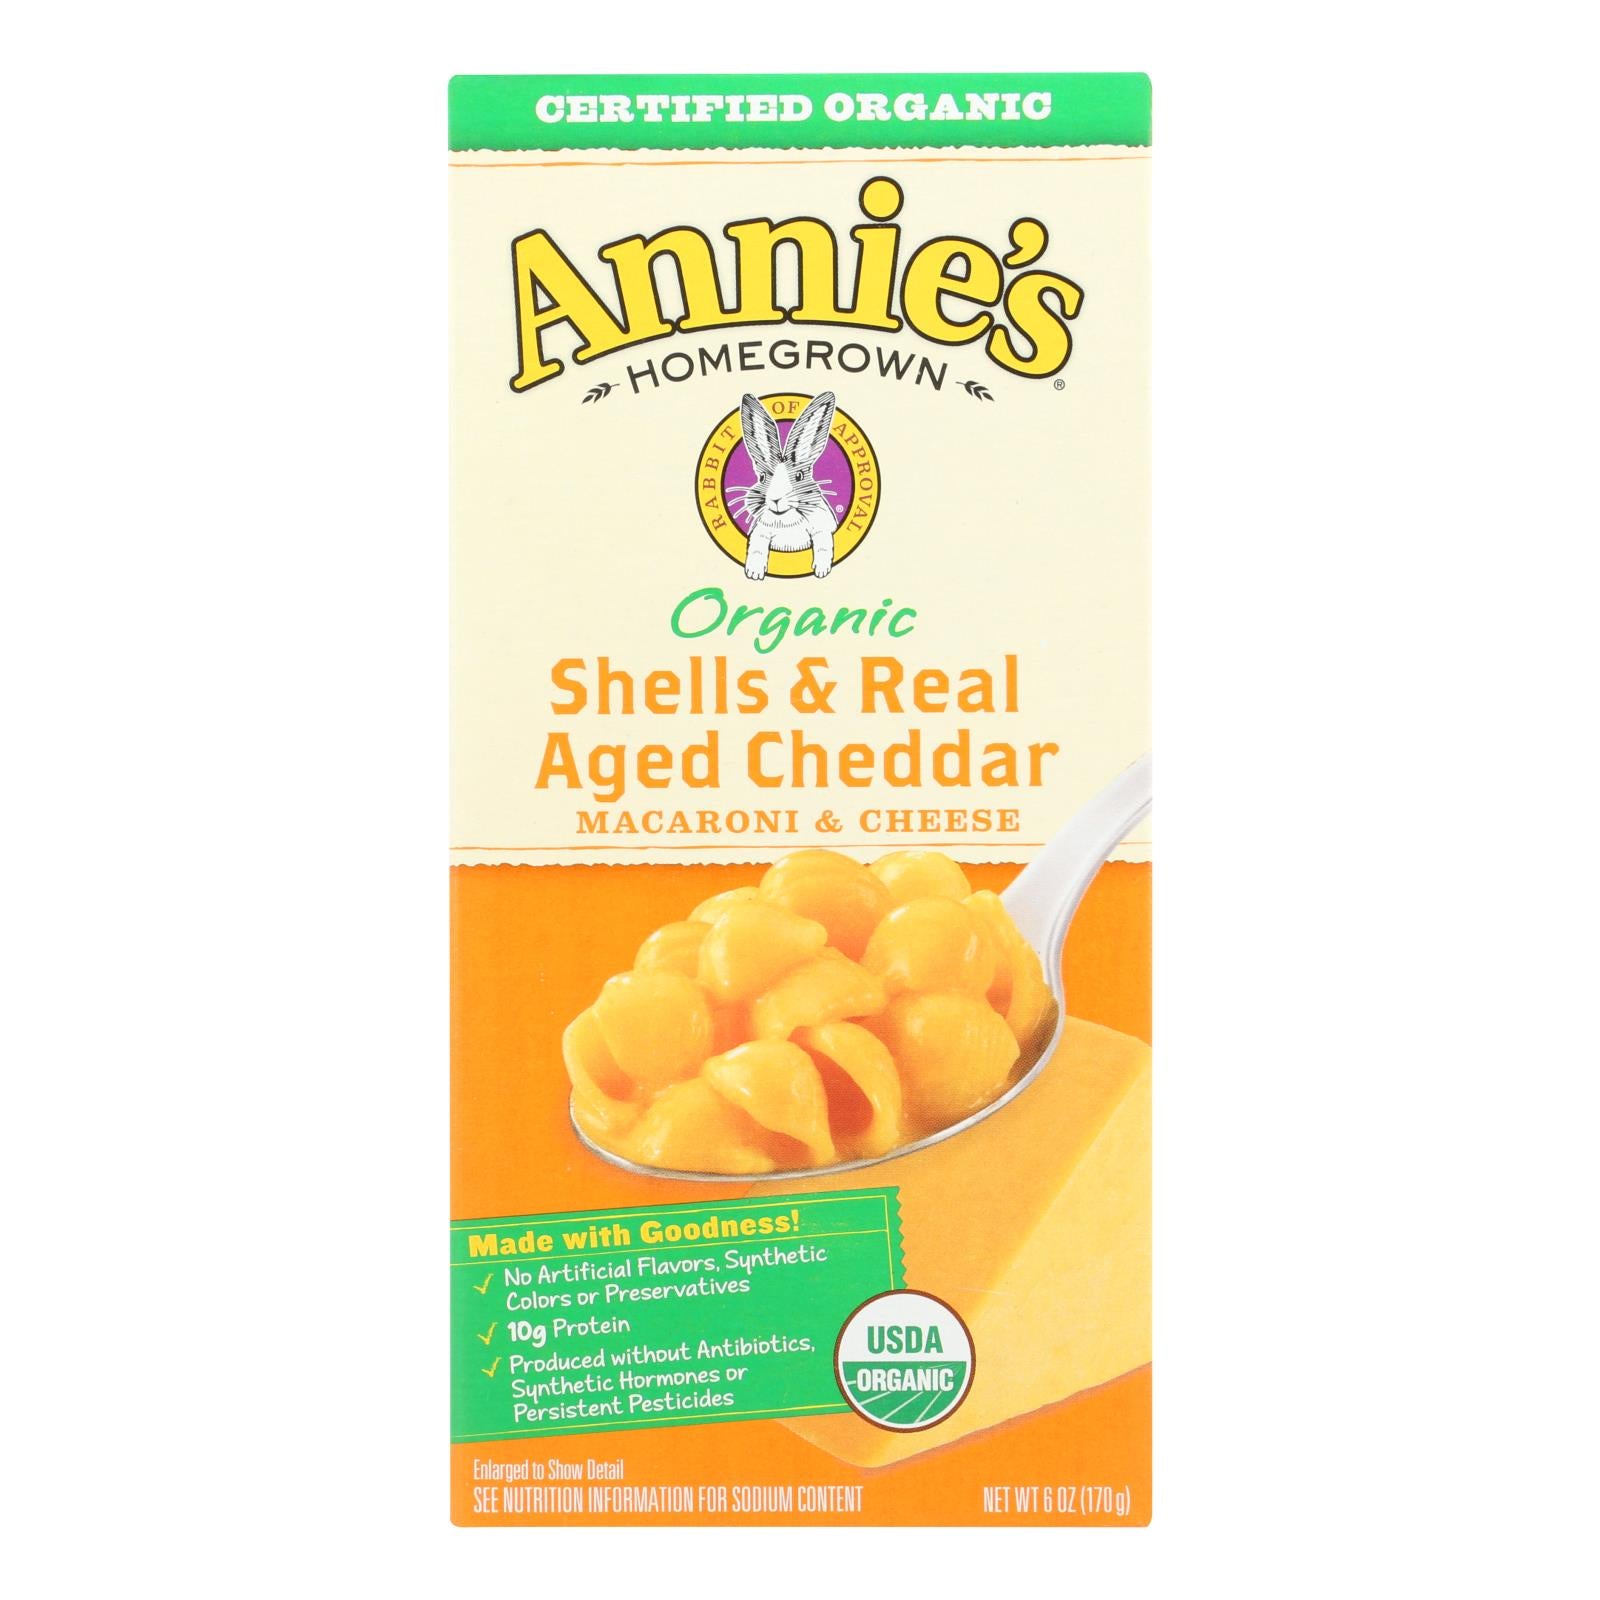 Annie'S Homegrown, Annie's Homegrown Organic Shells and Real Aged Cheddar Macaroni and Cheese - Case of 12 - 6 oz. (Pack of 12)